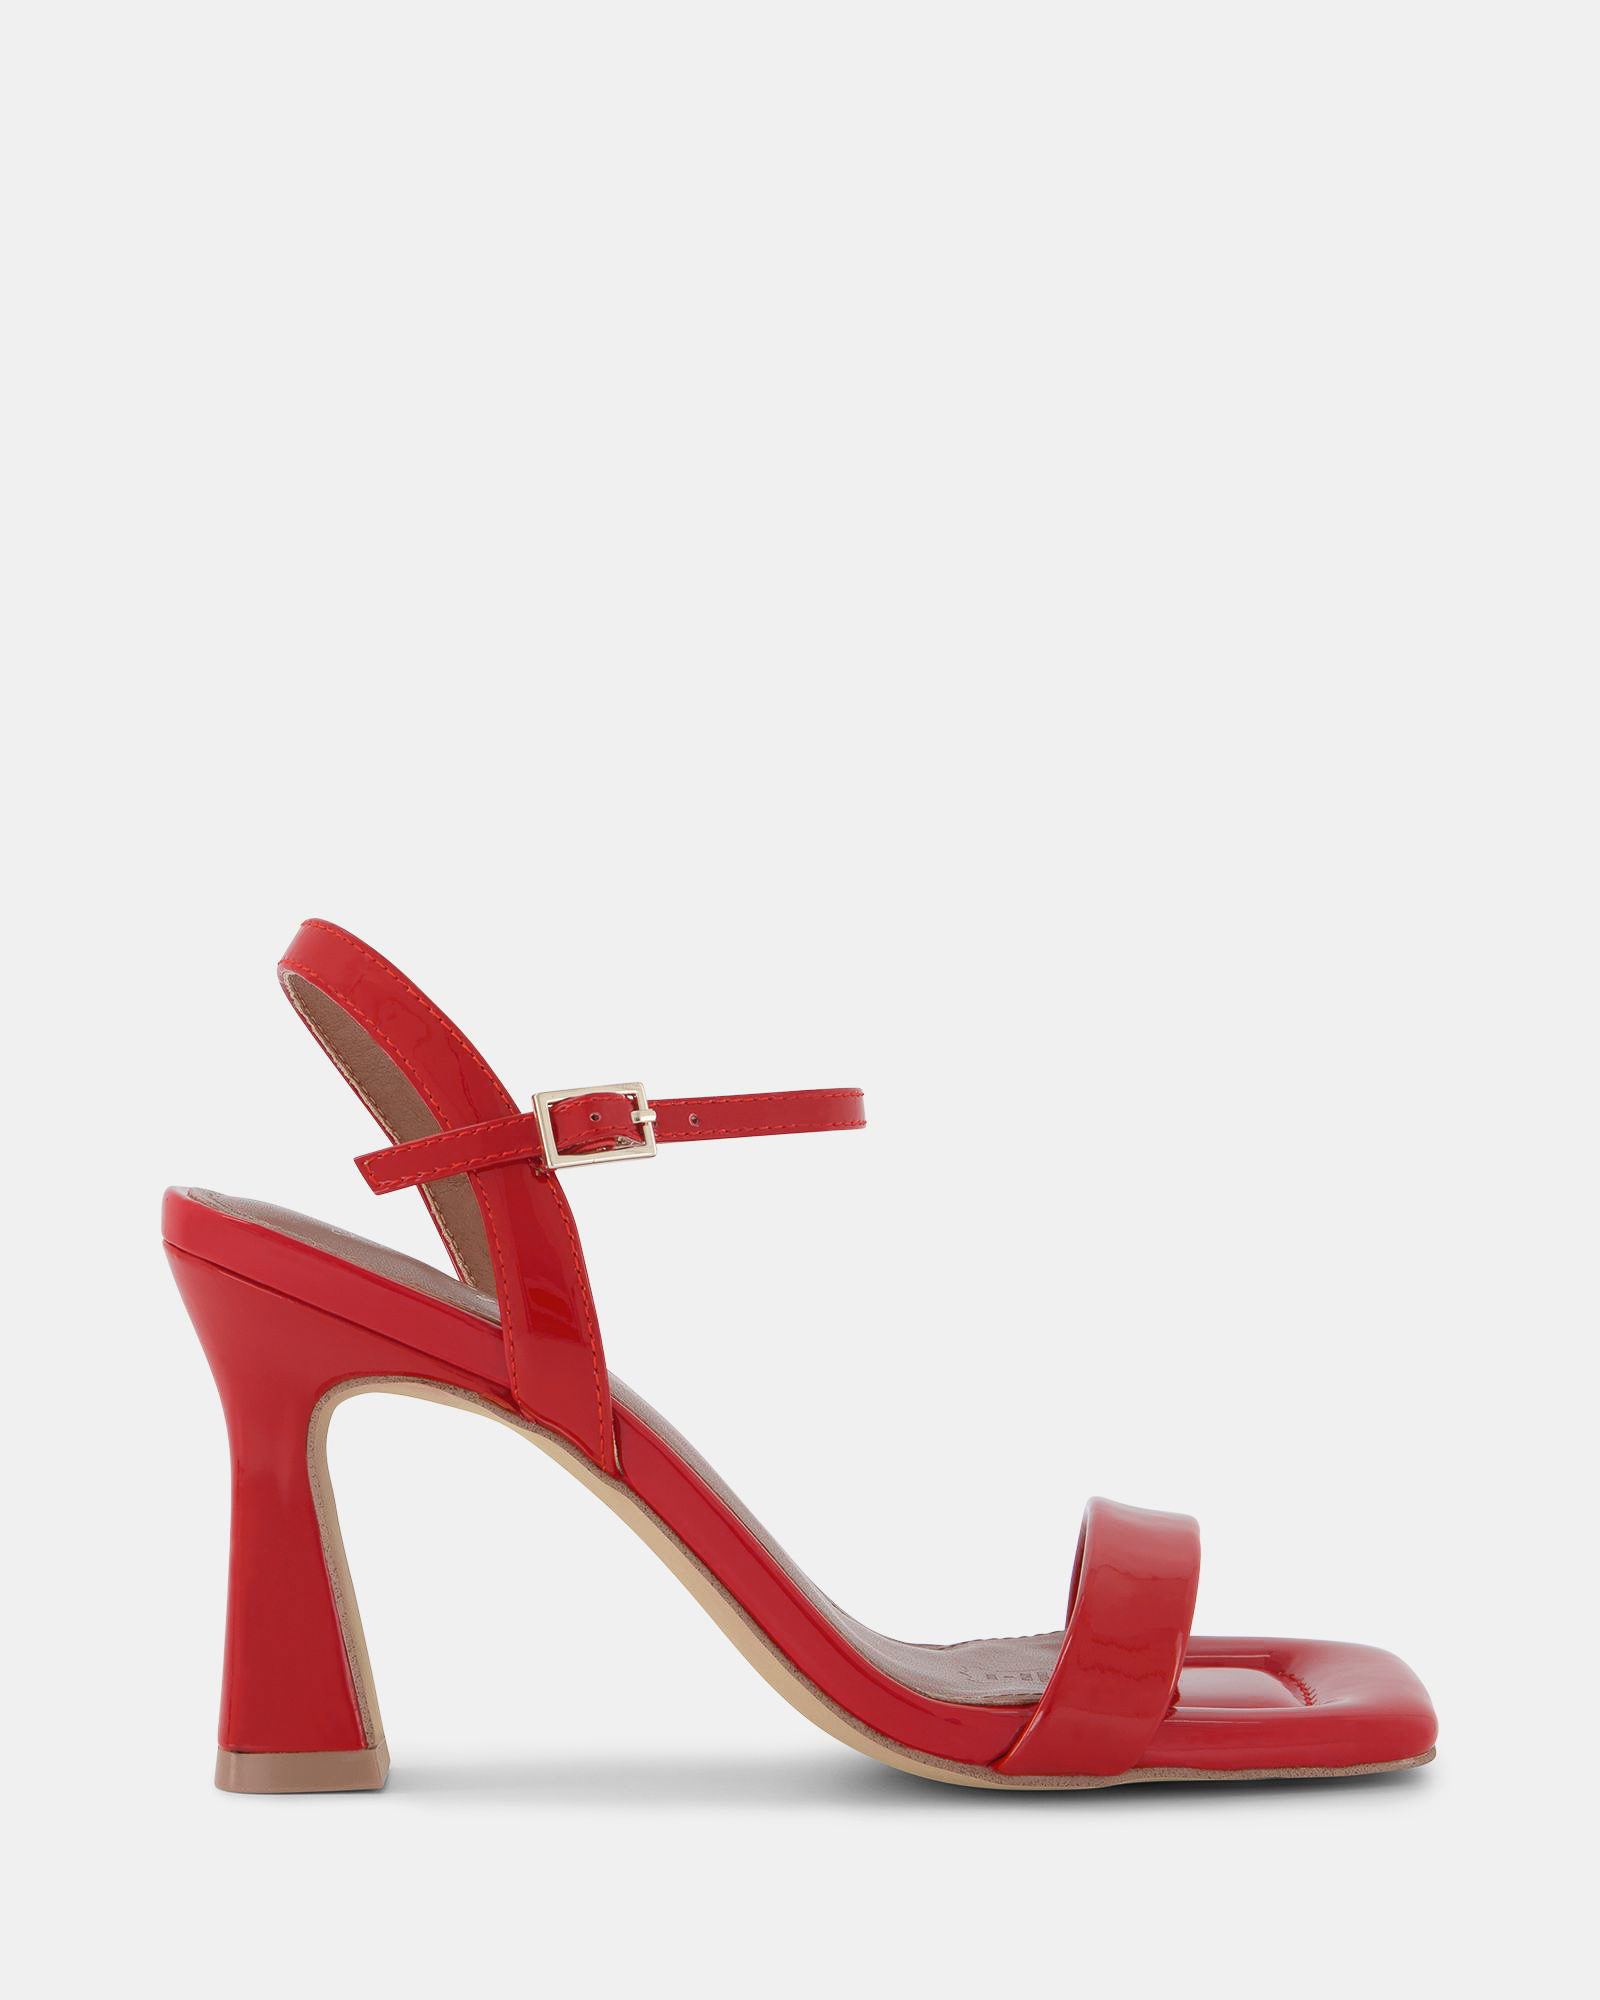 SHELLY SHEN Melcha Heels - Red Patent | Shoe Connection AU